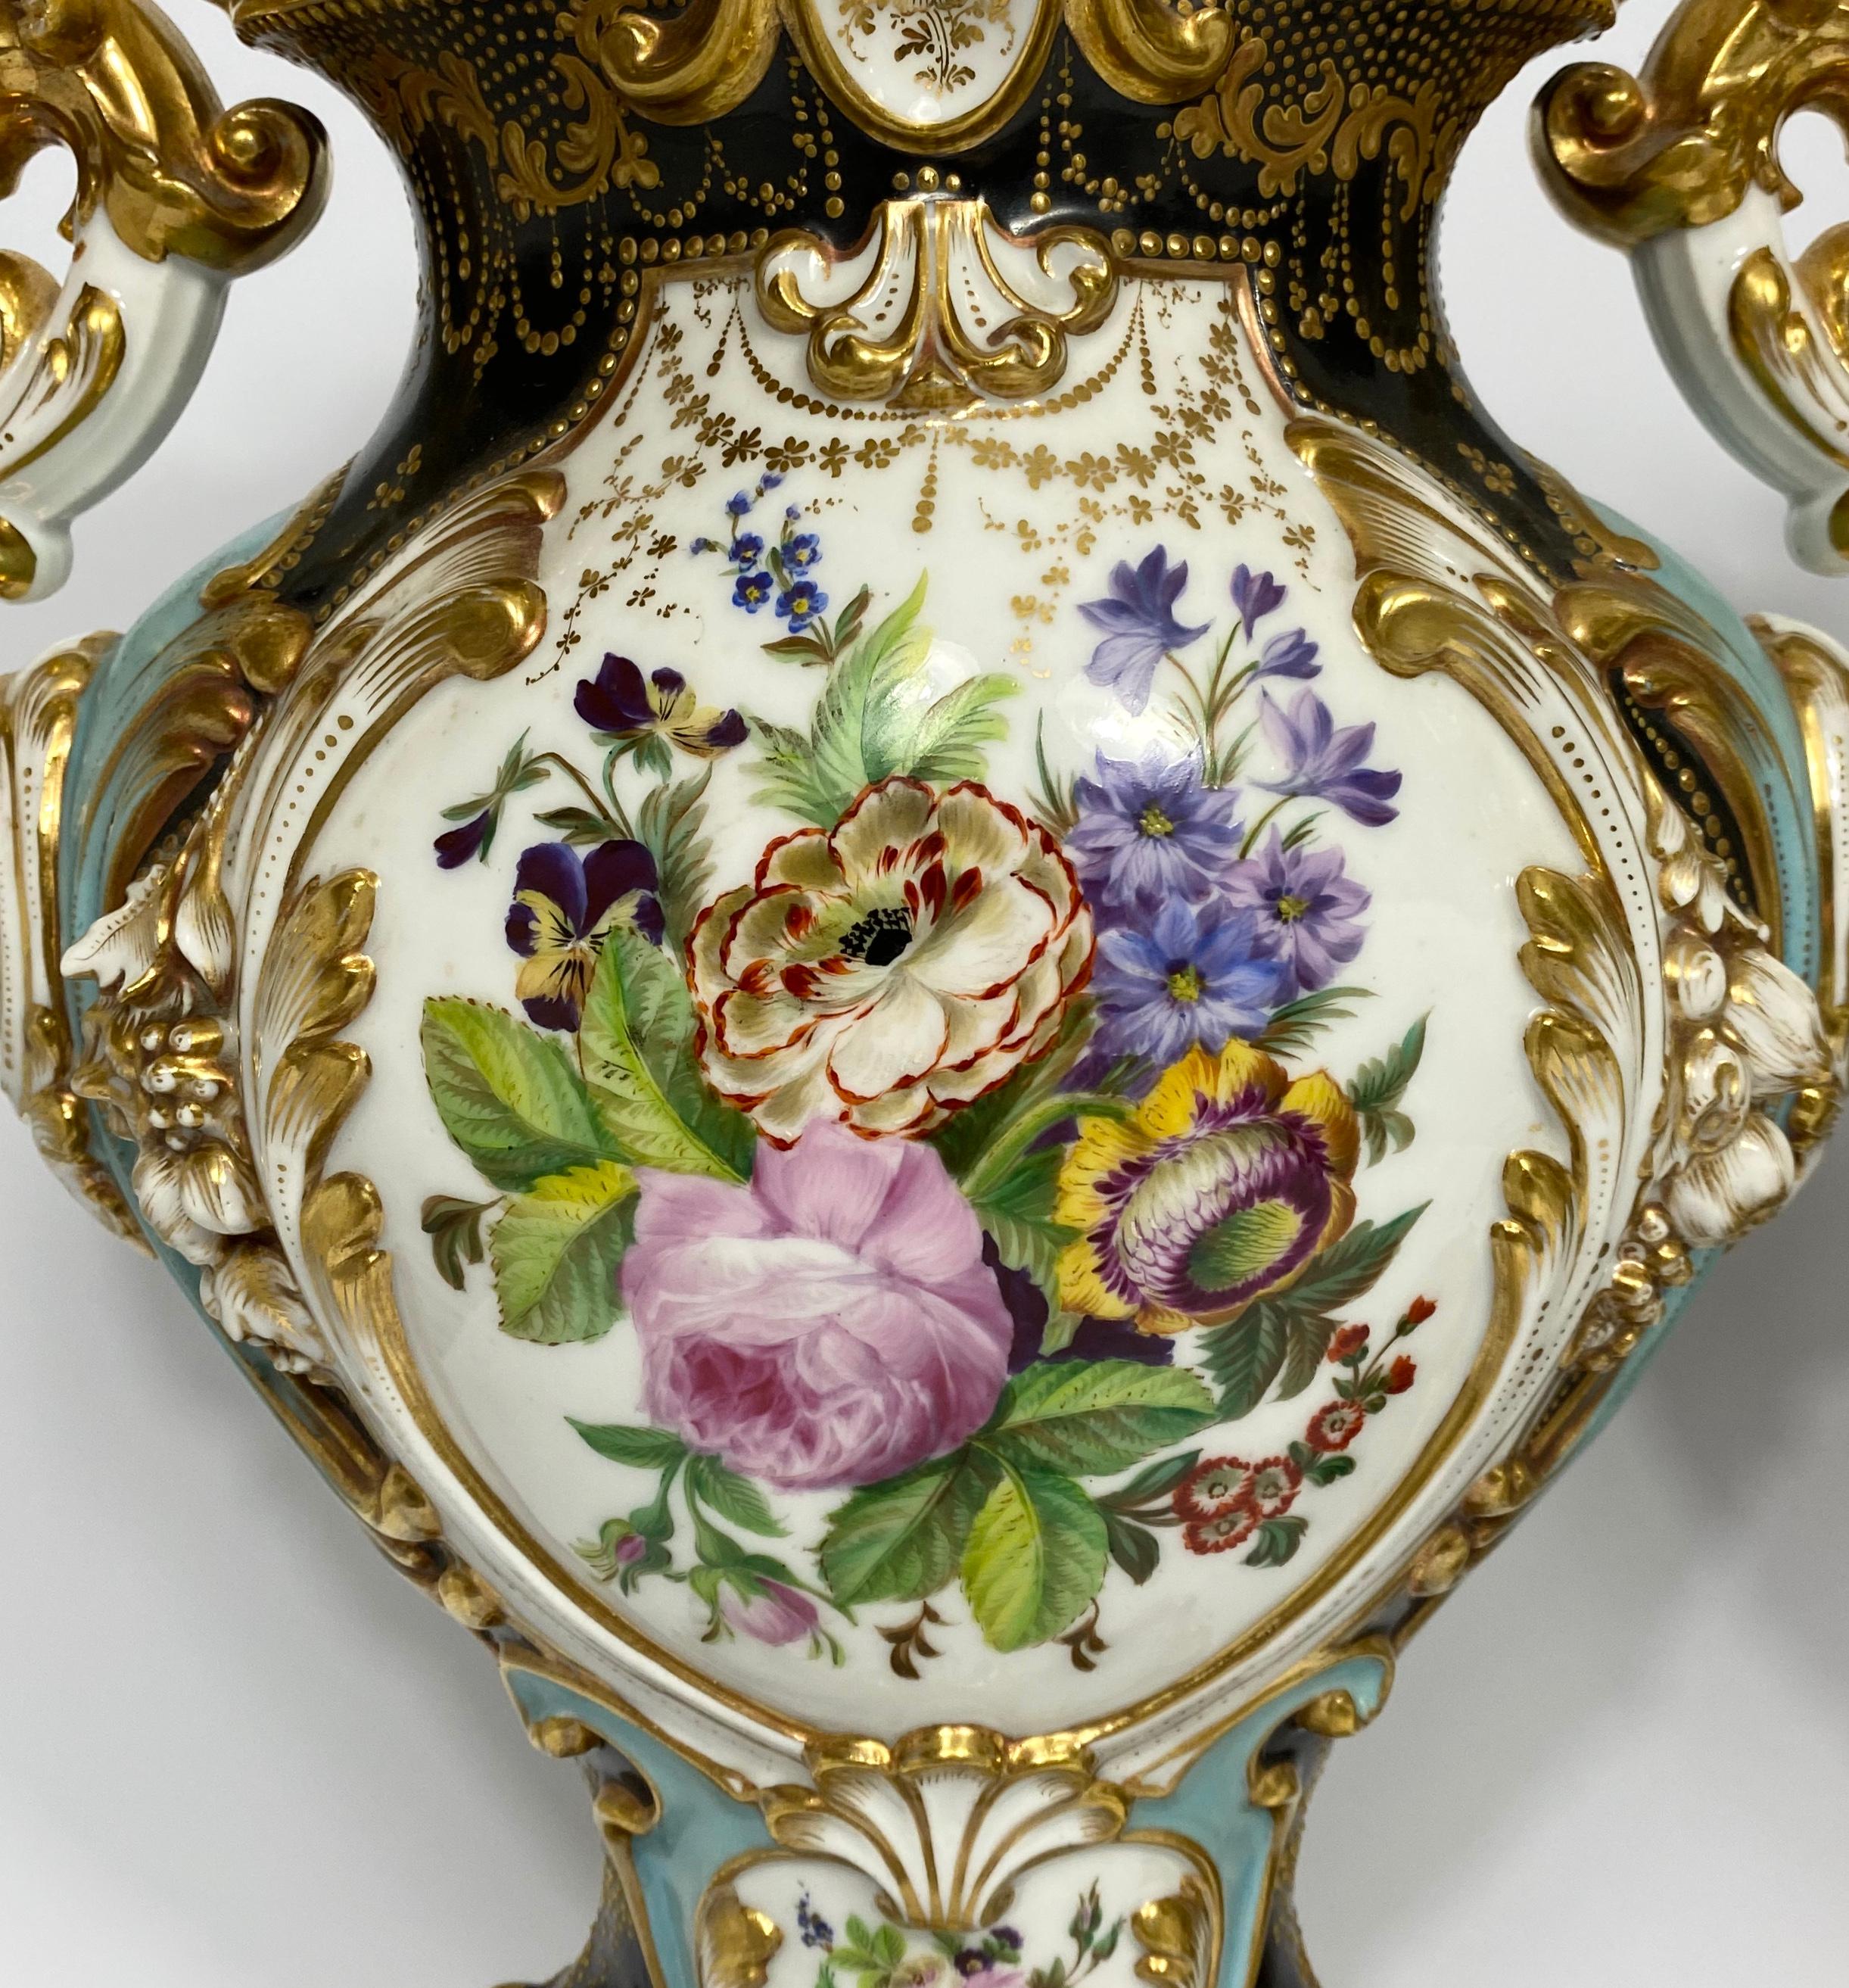 Pair of Paris porcelain vases, probably Jacob Petit, circa 1840. The elaborately modelled vases, having rococo scroll and flower moulded panels, finely painted with Summer flowers. All upon a black and turquoise ground, decorated with raised gilt